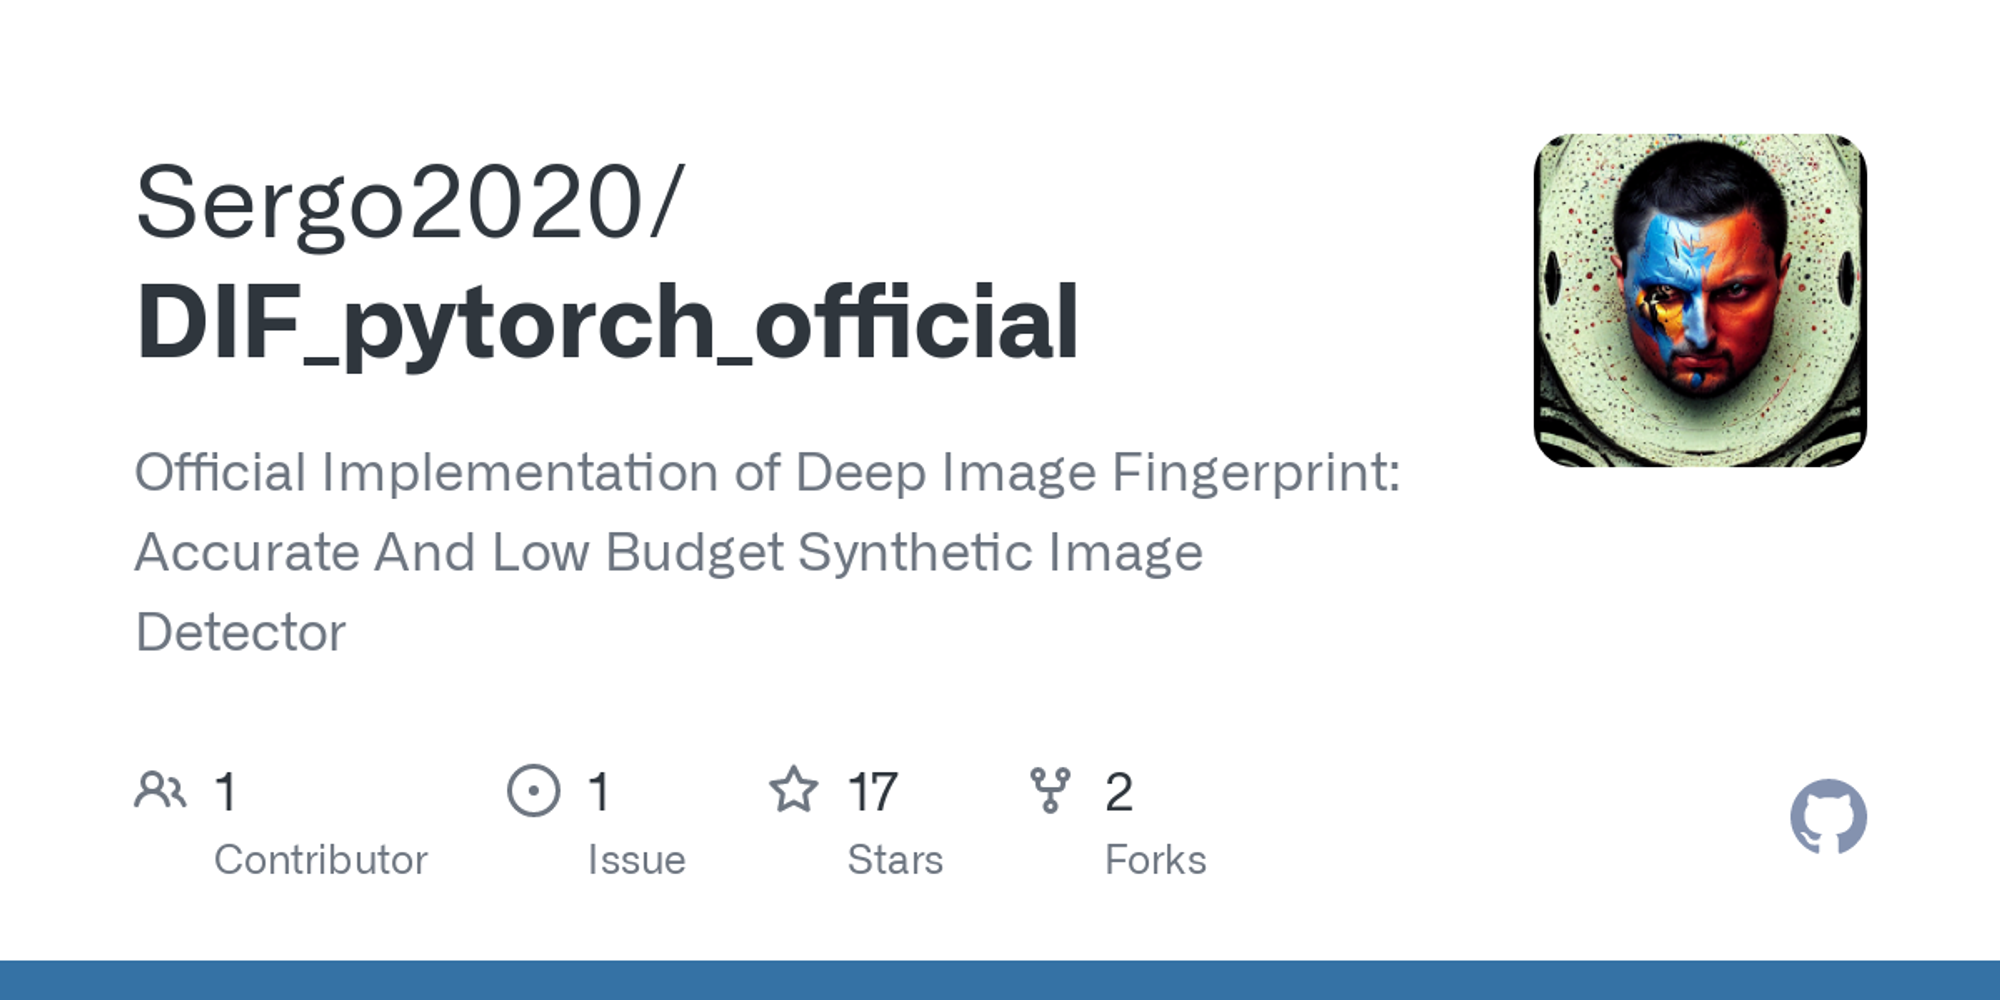 GitHub - Sergo2020/DIF_pytorch_official: Official Implementation of Deep Image Fingerprint: Accurate And Low Budget Synthetic Image Detector